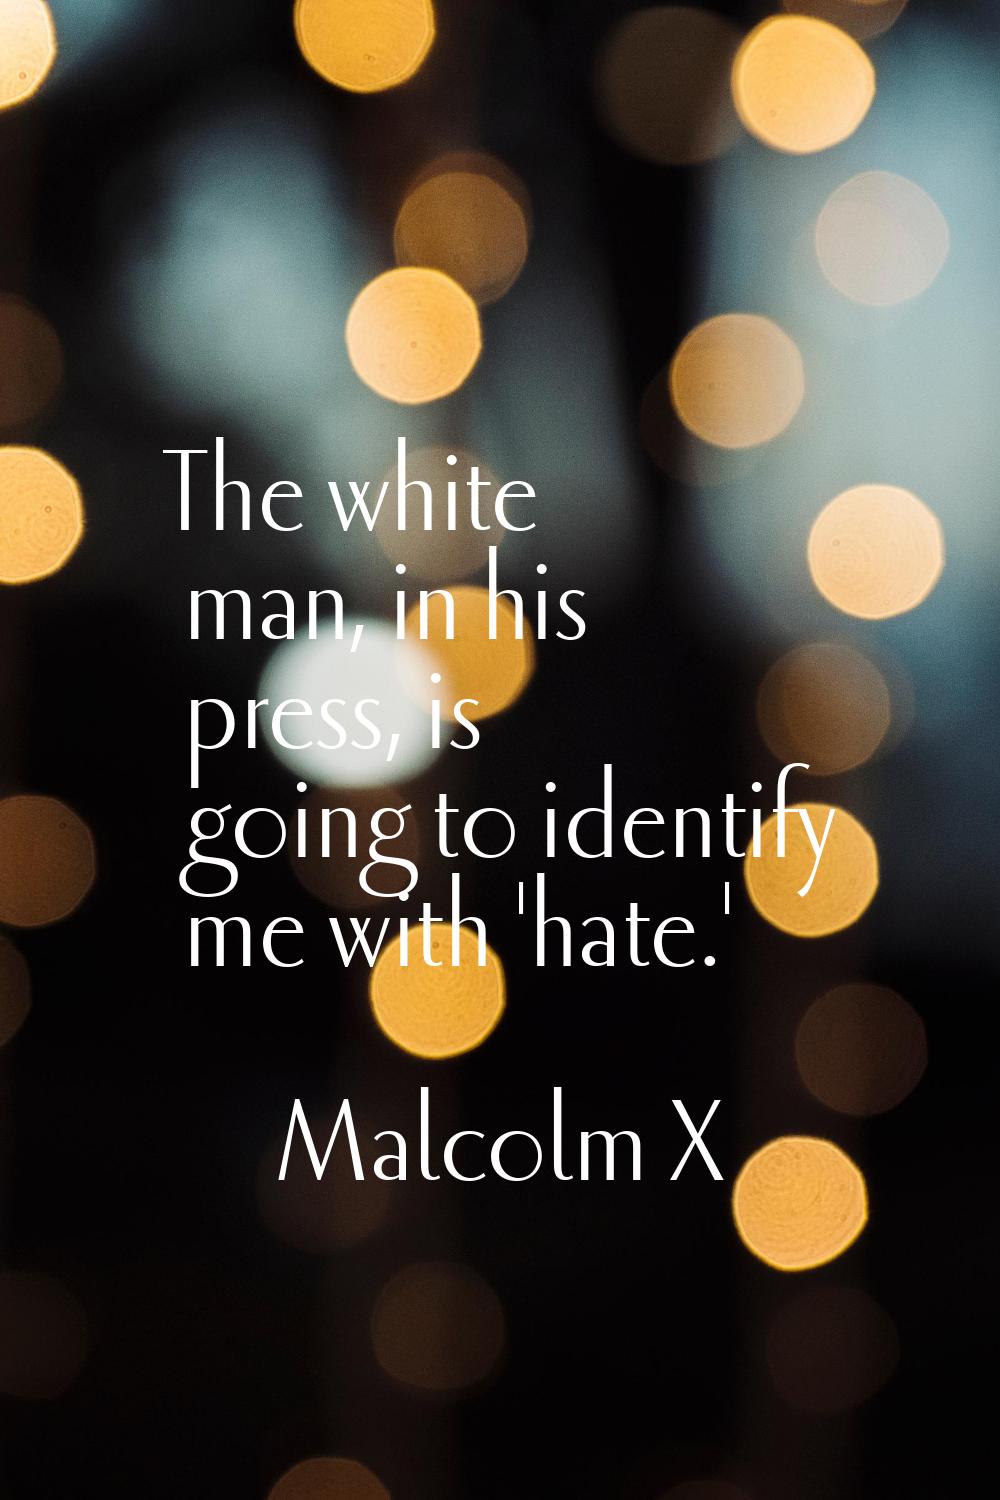 The white man, in his press, is going to identify me with 'hate.'